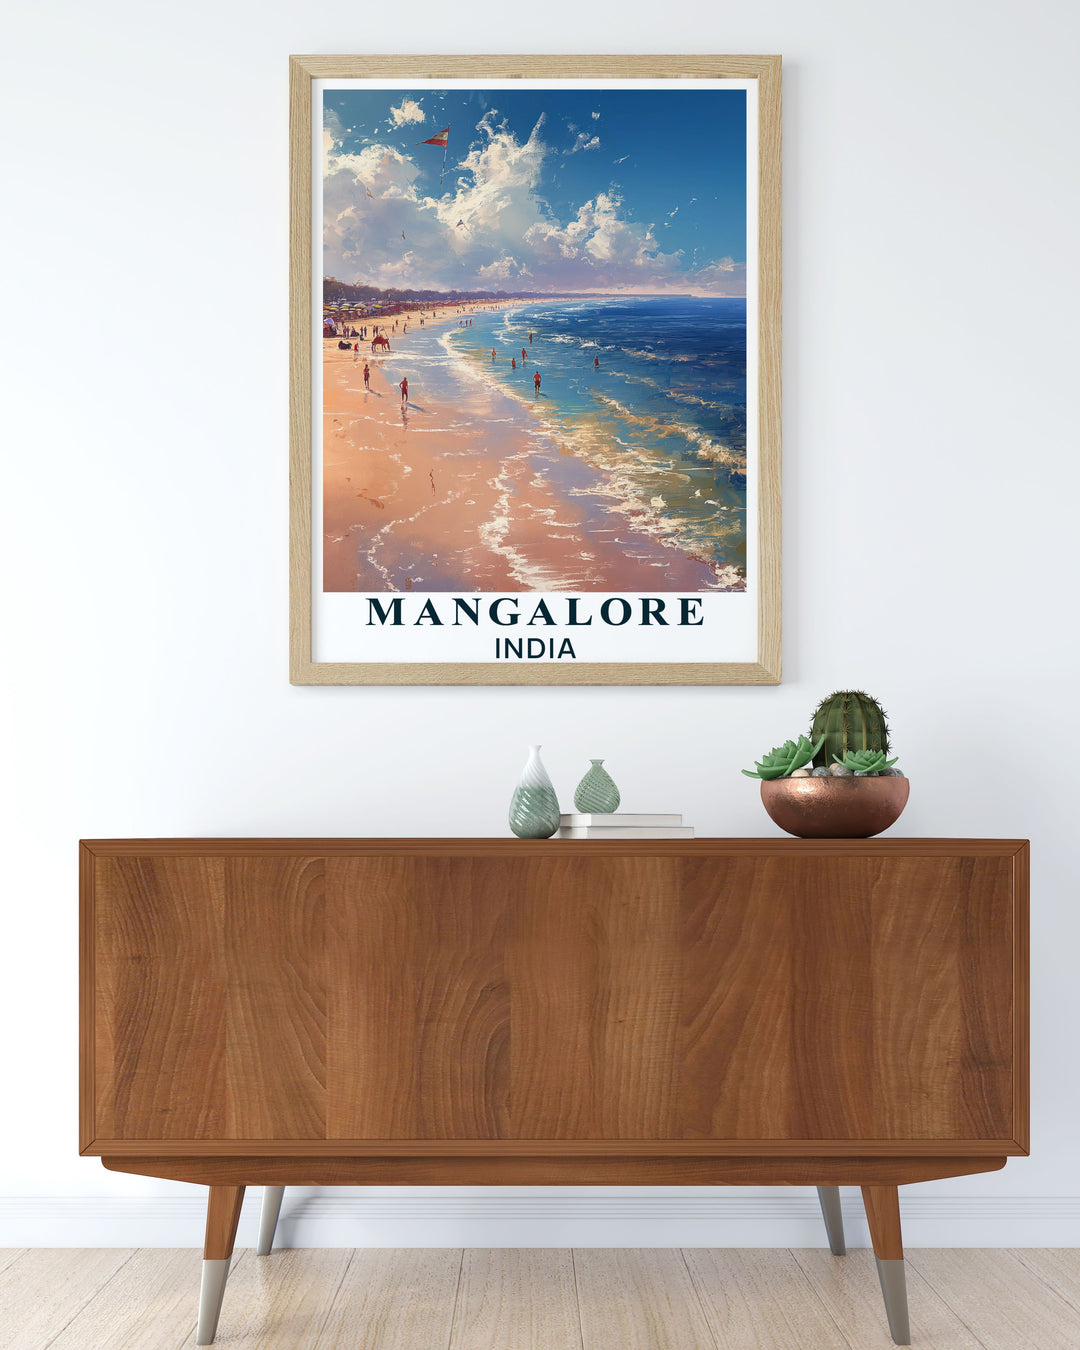 Showcasing the vibrant cityscape of Mangalore and the serene Panambur Beach, this poster is ideal for art lovers who appreciate the diverse and rich cultural heritage of Karnataka and the natural beauty of its coastline.